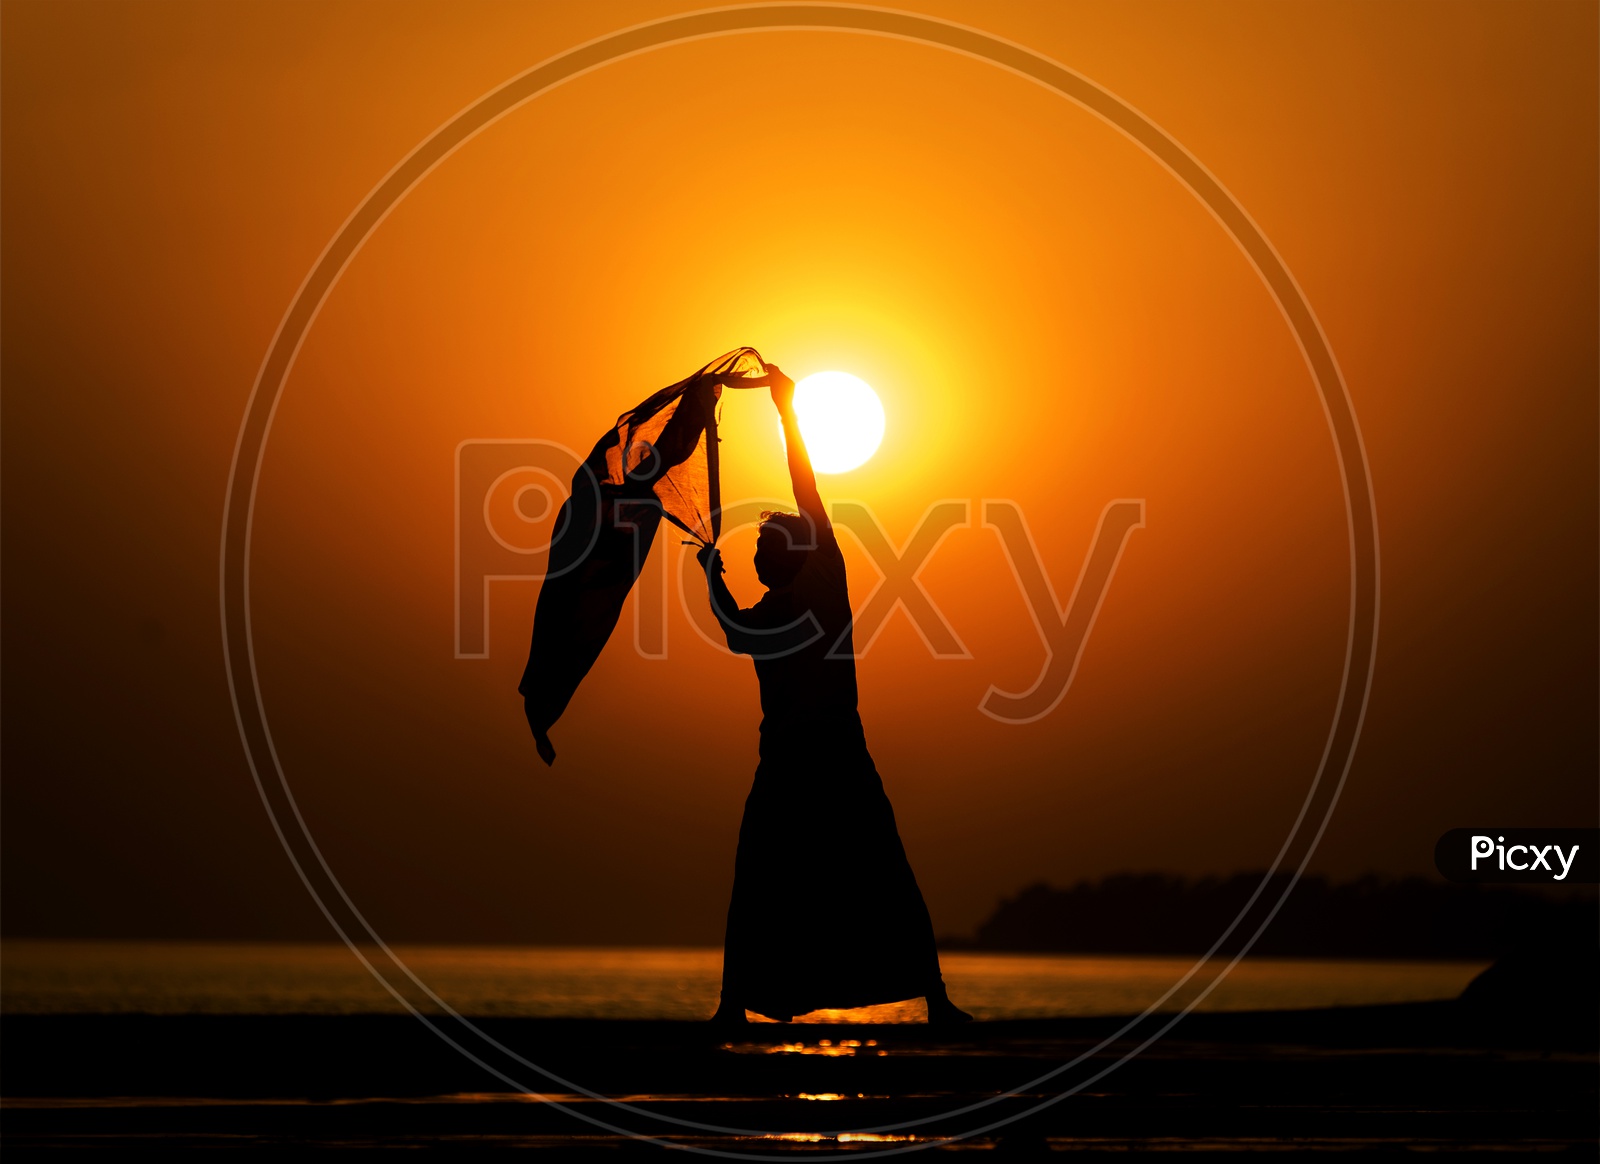 Silhouette of man On a Lake Bank With Scarf In Hands Over a Golden Sky In Background